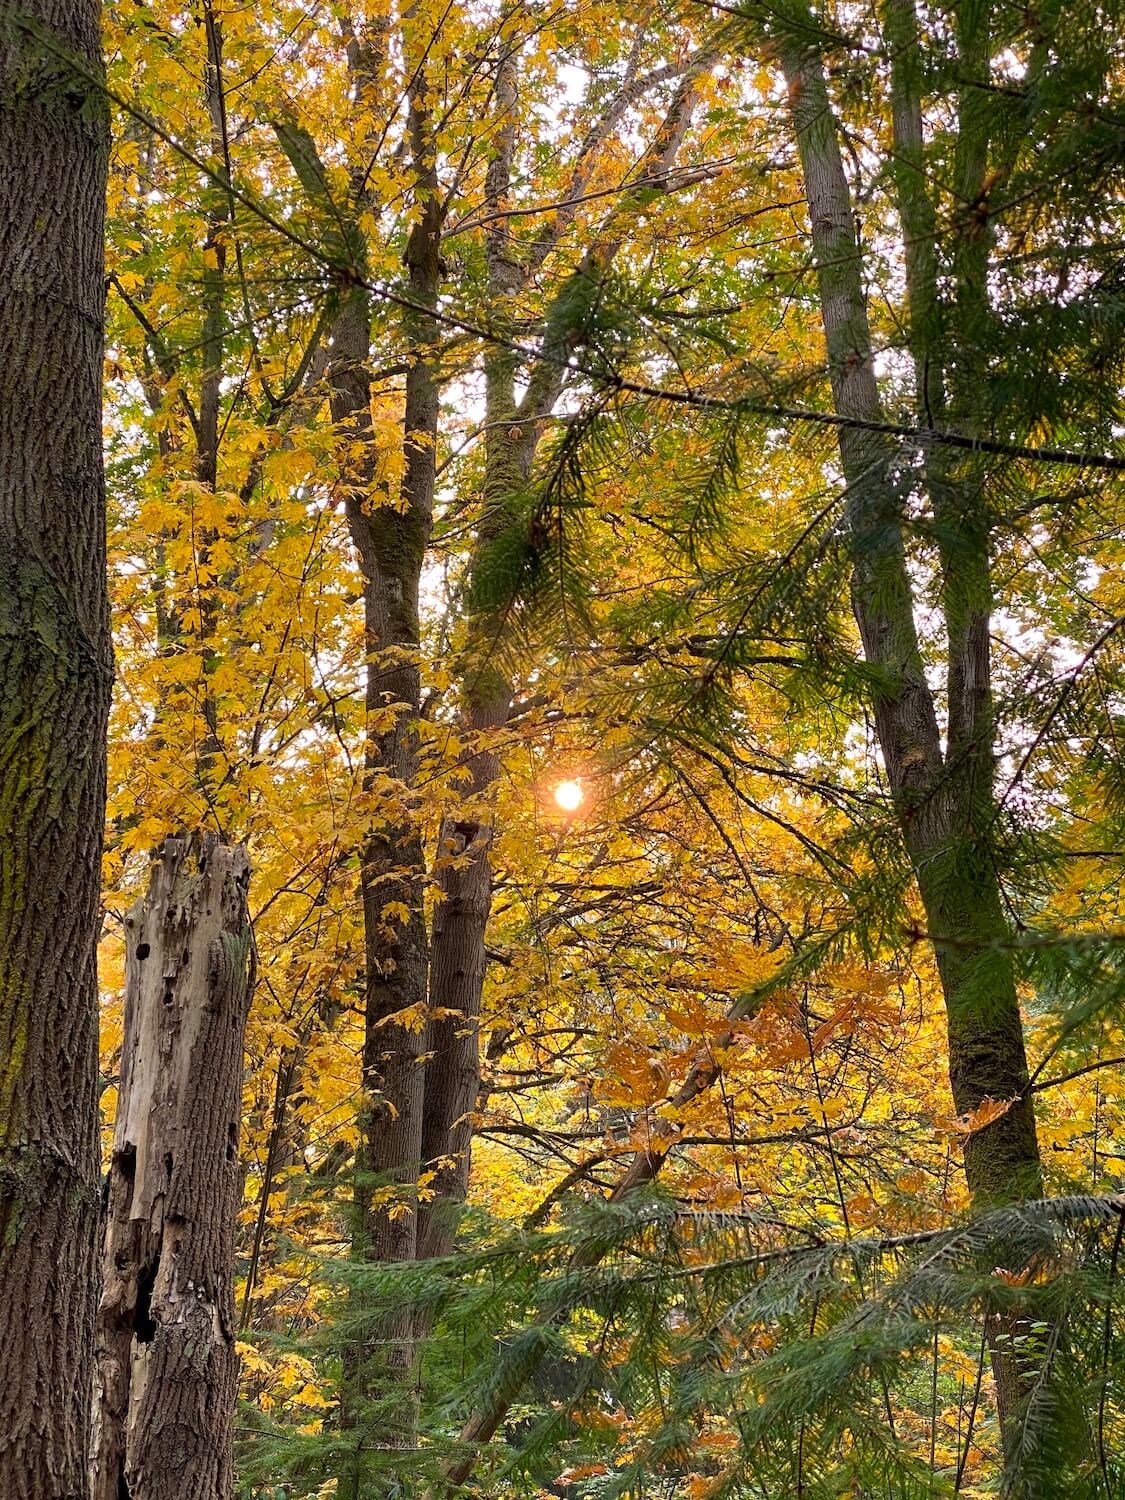 People new to Seattle or moving to Seattle should find a special place to serve as their oasis.  This is a fall scene at a park with the yellow leaves of maple trees with a tight ray of sunshine shining through.  There are a few green fir branches in the forest as well. 